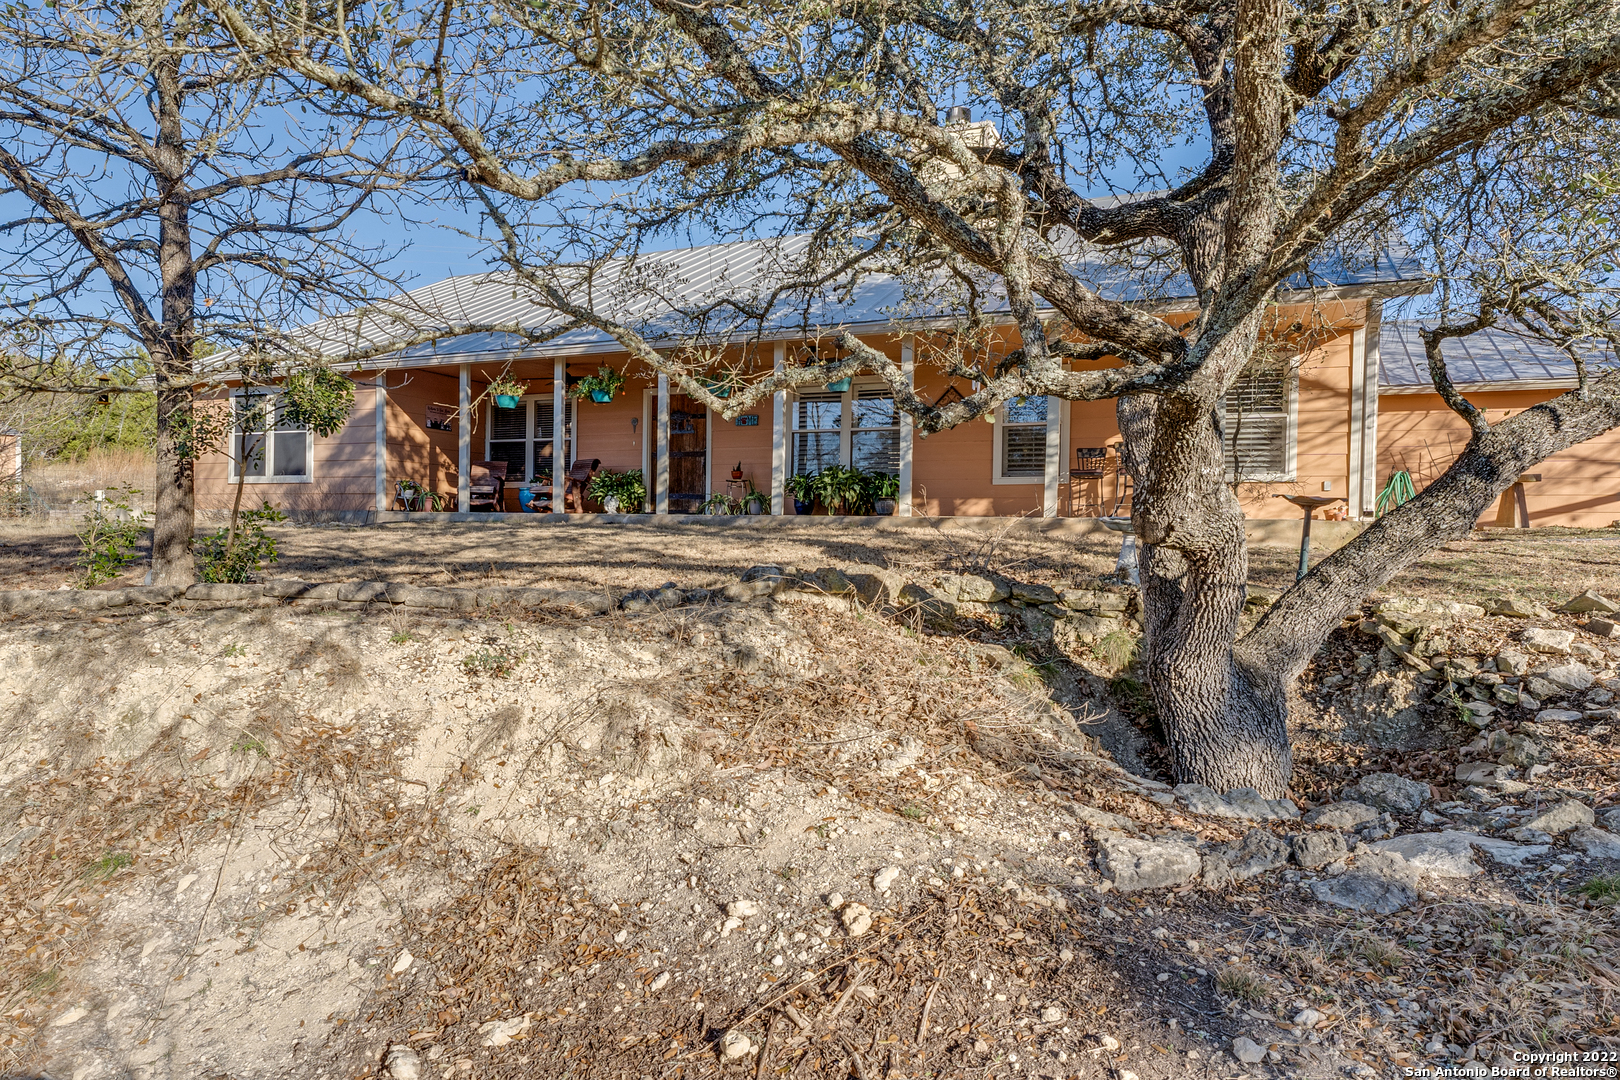 Come enjoy just over 4.5 acres of hill country that's walking distance from Boerne Lake! This country style ranch home includes over 2,400 feet of living space, back patio with fenced in backyard, sport court for kids to play on, a shed, and plenty of open space for play, gardening, pets. etc!     Contact me for any questions or comments about the property and what it has to offer!